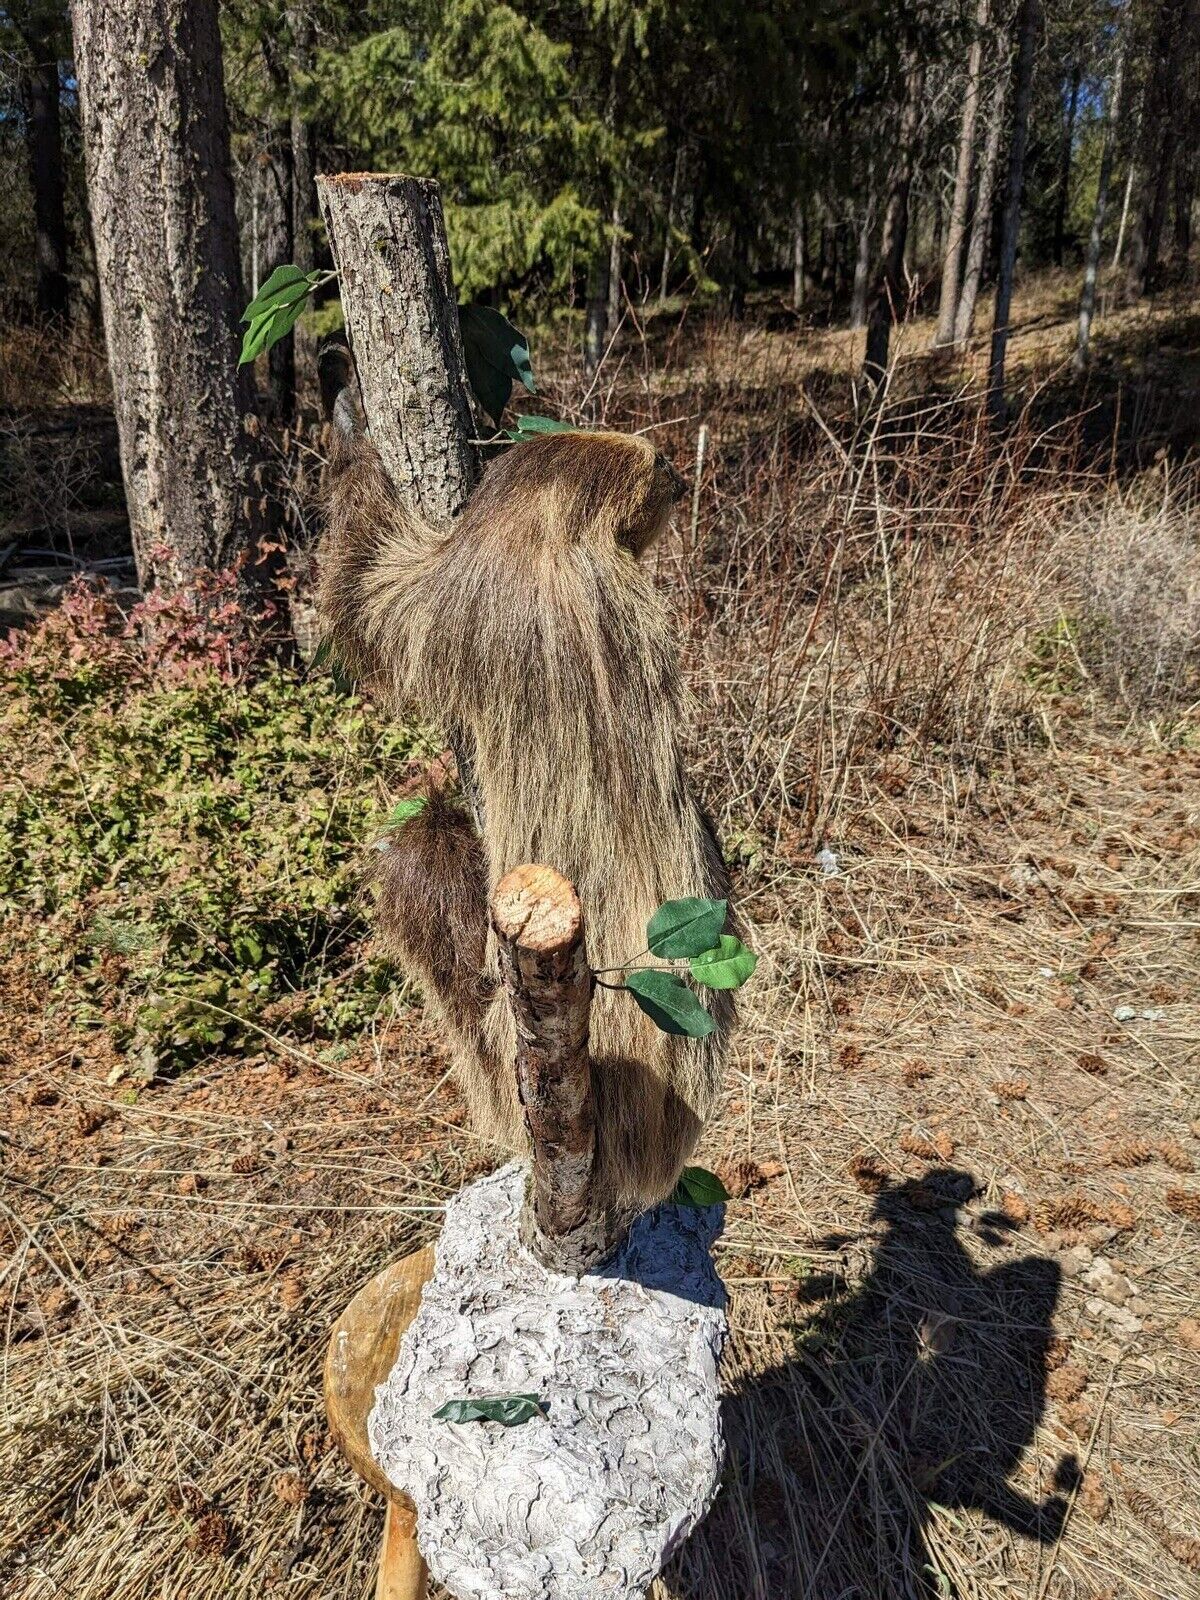 New Excellent Adult Sloth Taxidermy Mount Full Body